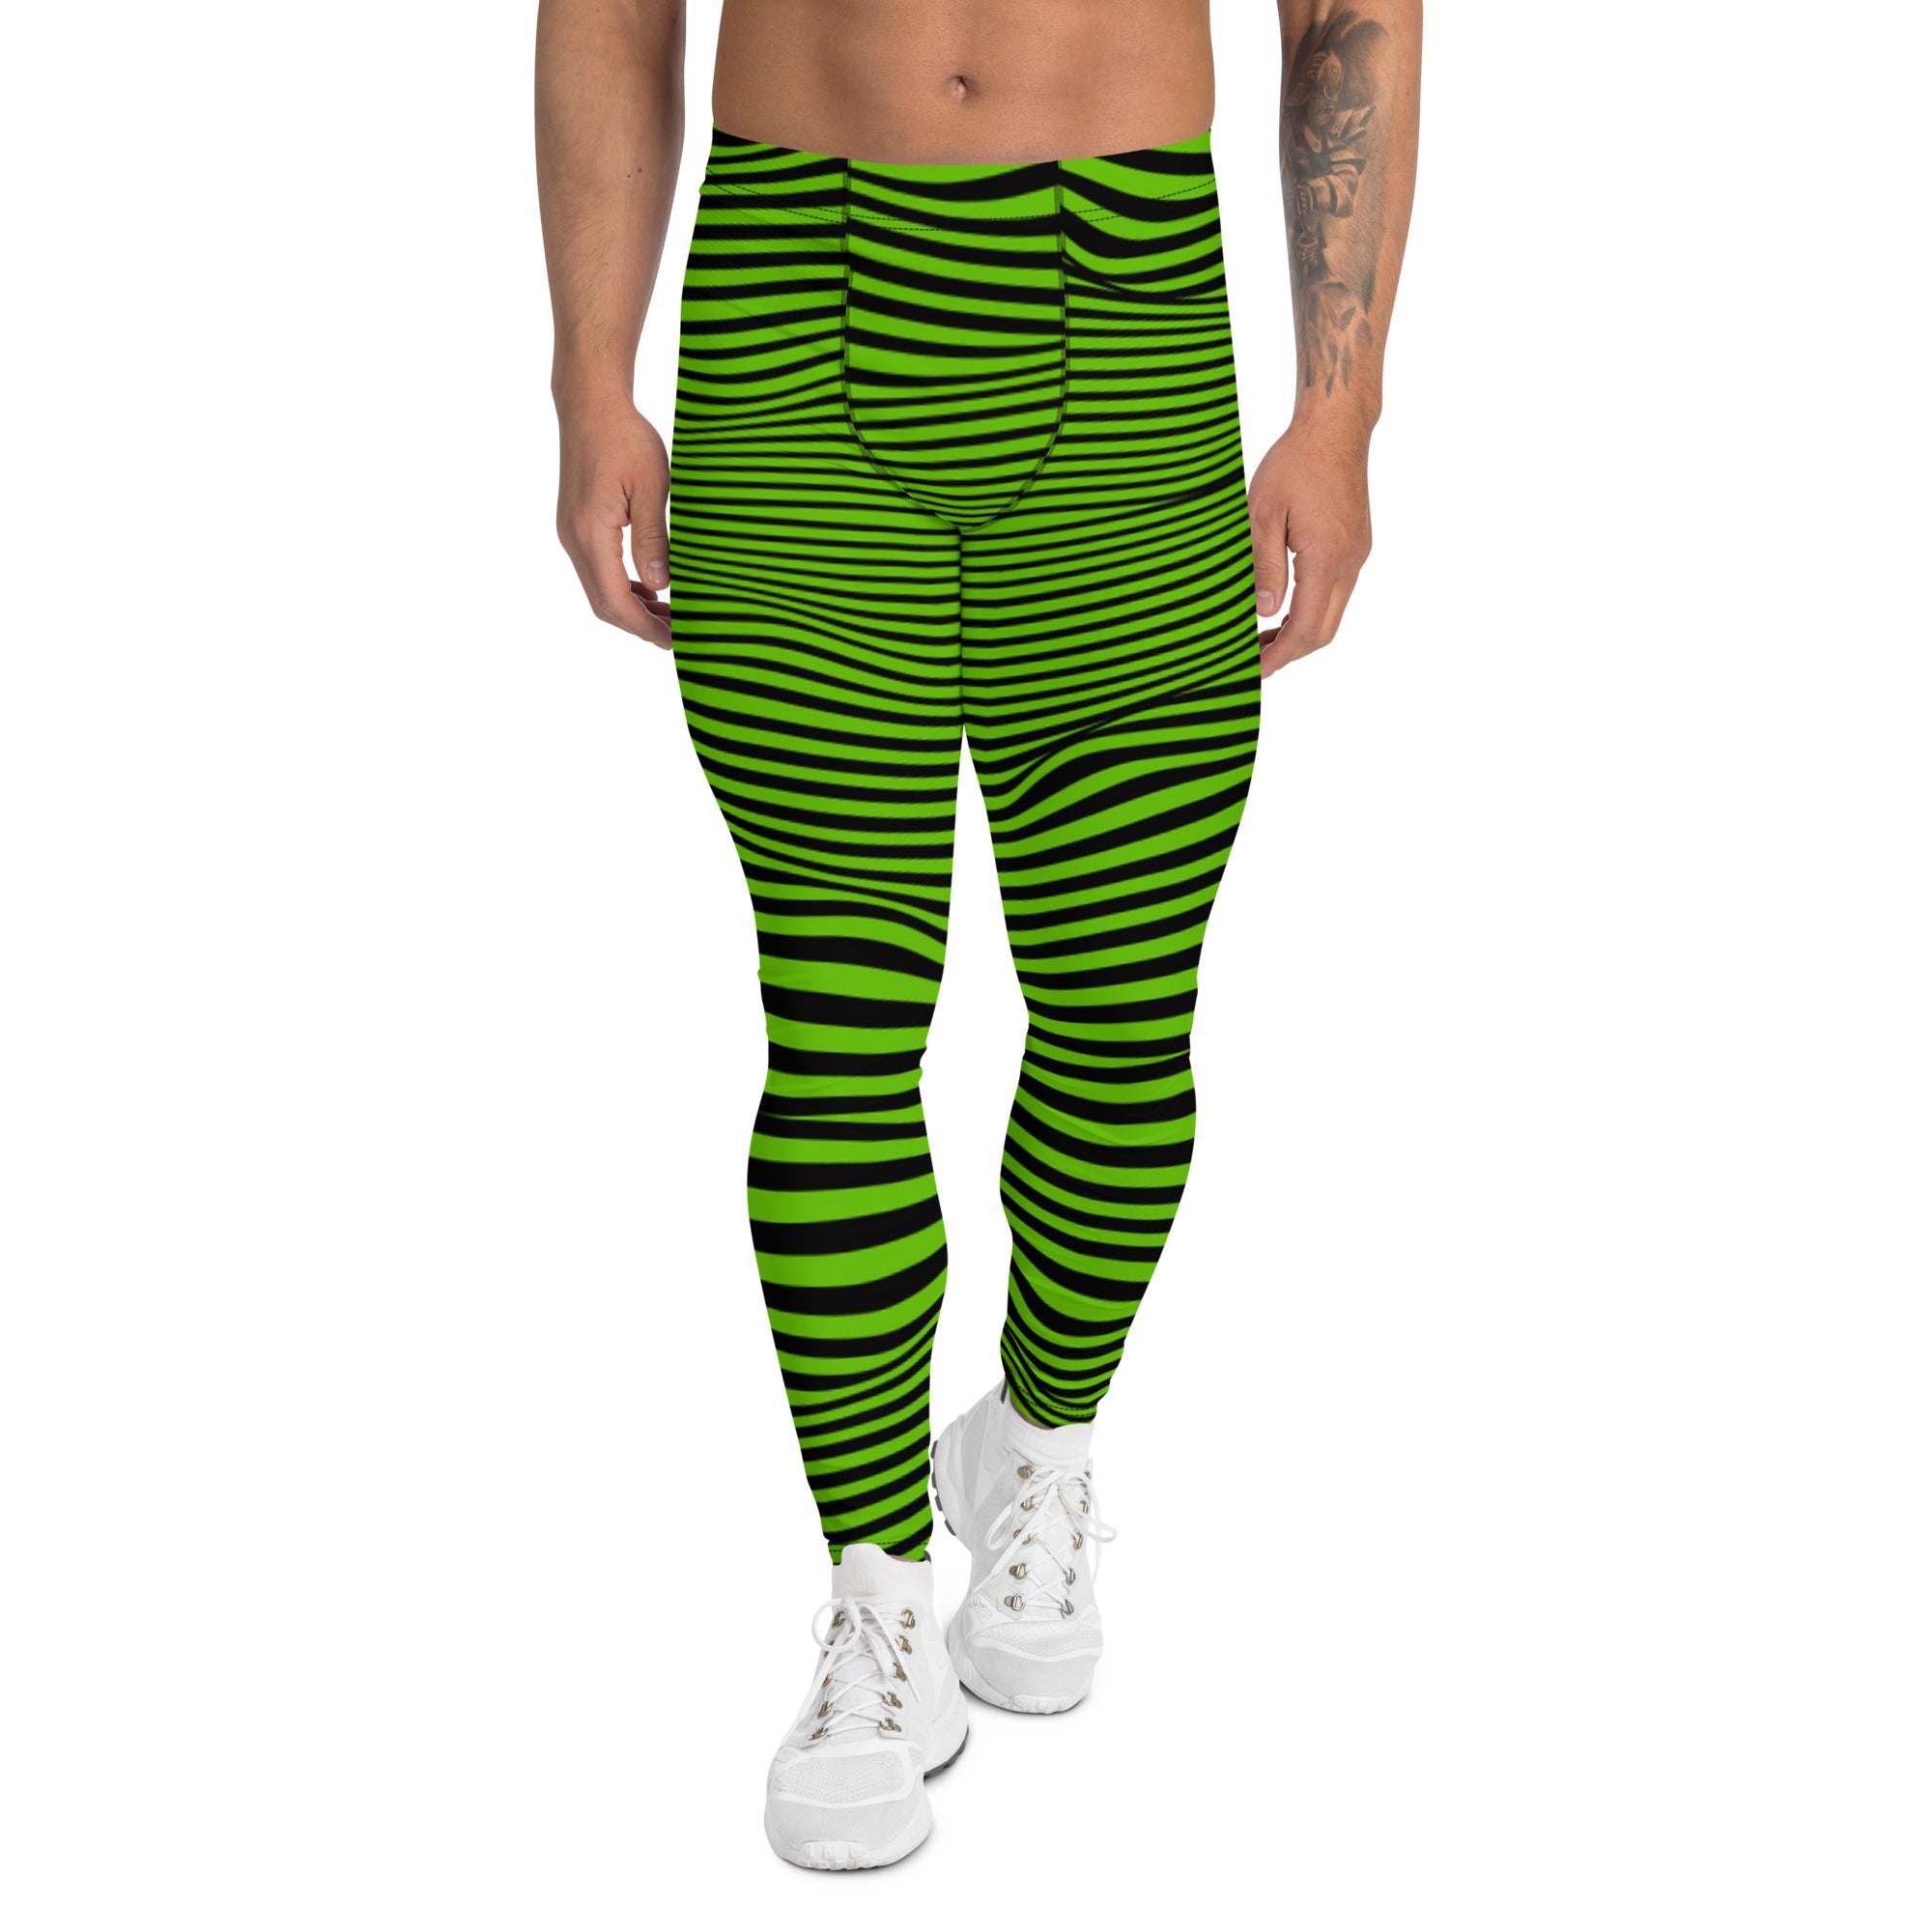 Bright Green Meshed Abstract Men's Leggings, Best Modern Striped Minimalist Premium Designer Print Sexy Meggings Men's Workout Gym Tights Leggings, Men's Compression Tights Pants - Made in USA/ EU/ MX (US Size: XS-3XL) 